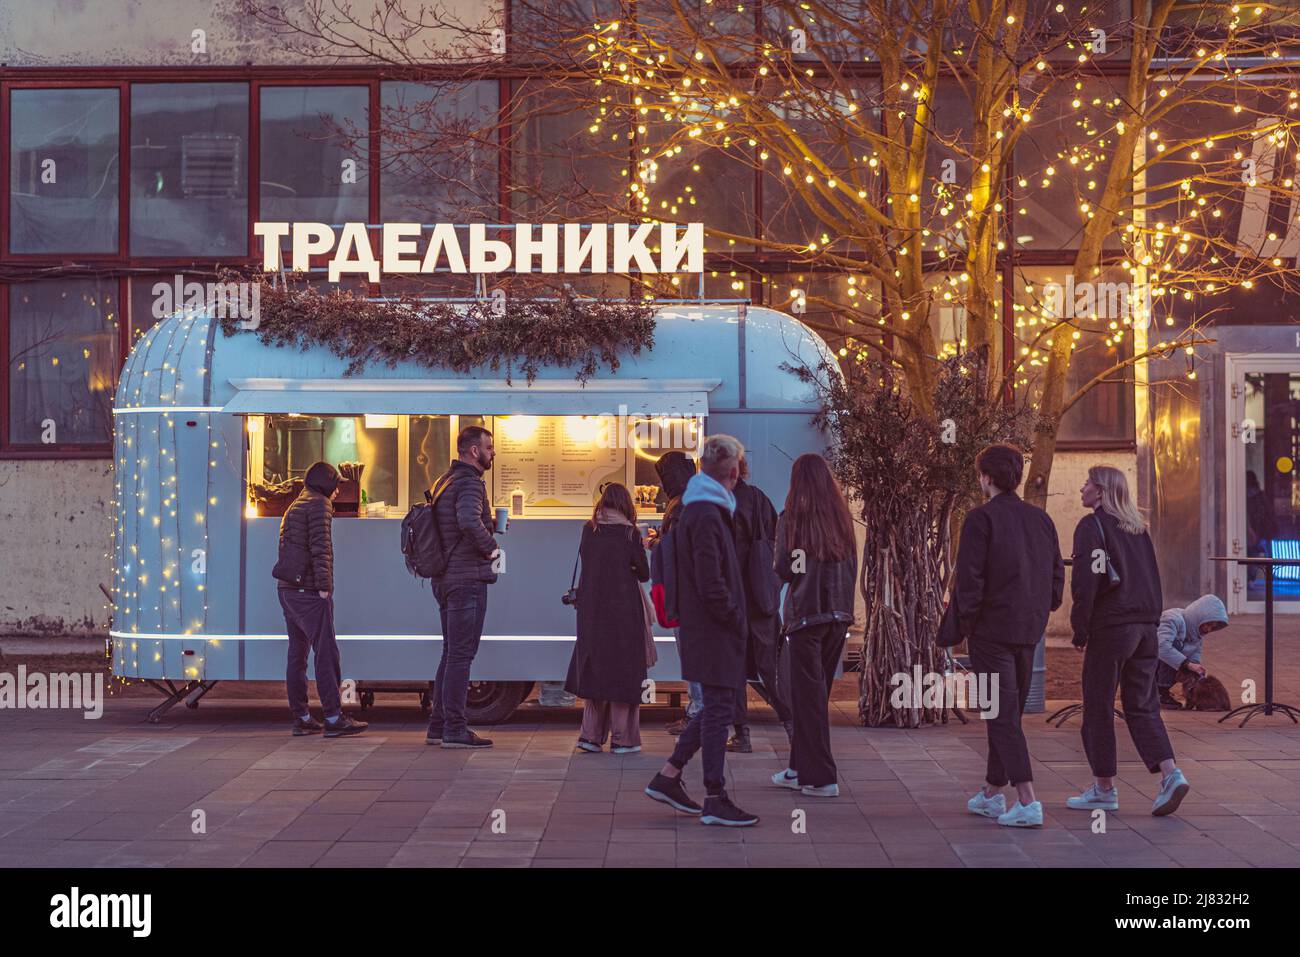 Saint Petersburg, Russia: people stand in line in front of a food truck selling trdelniks (written in Russian on the shop sign) at Sevkabel Port. Stock Photo